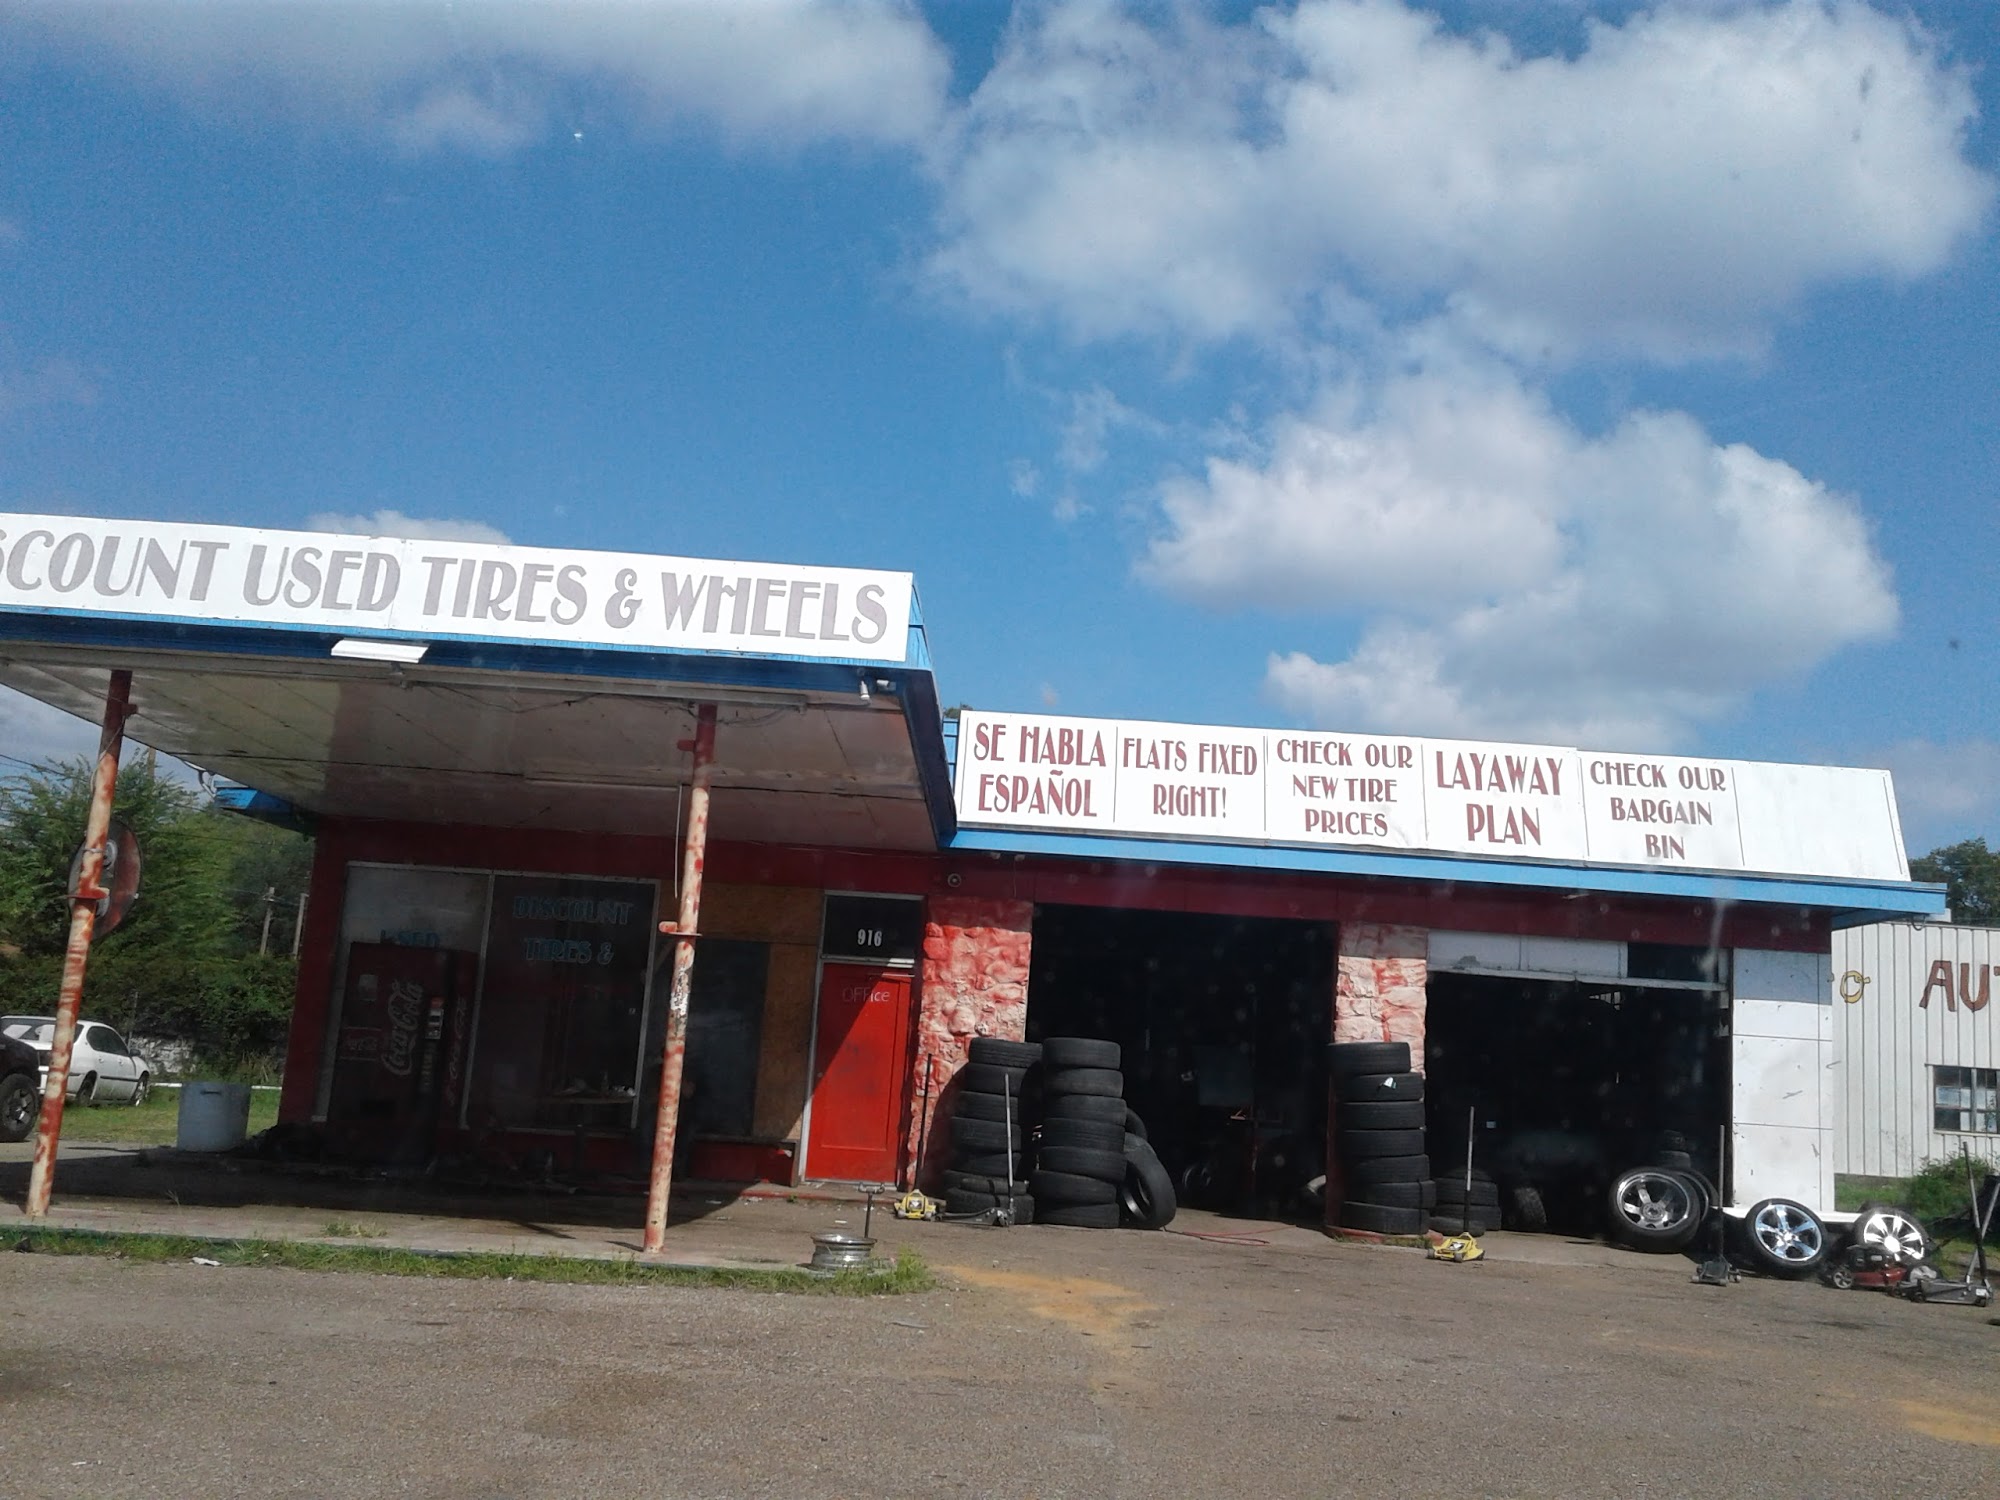 Discount Used Tires & Wheels